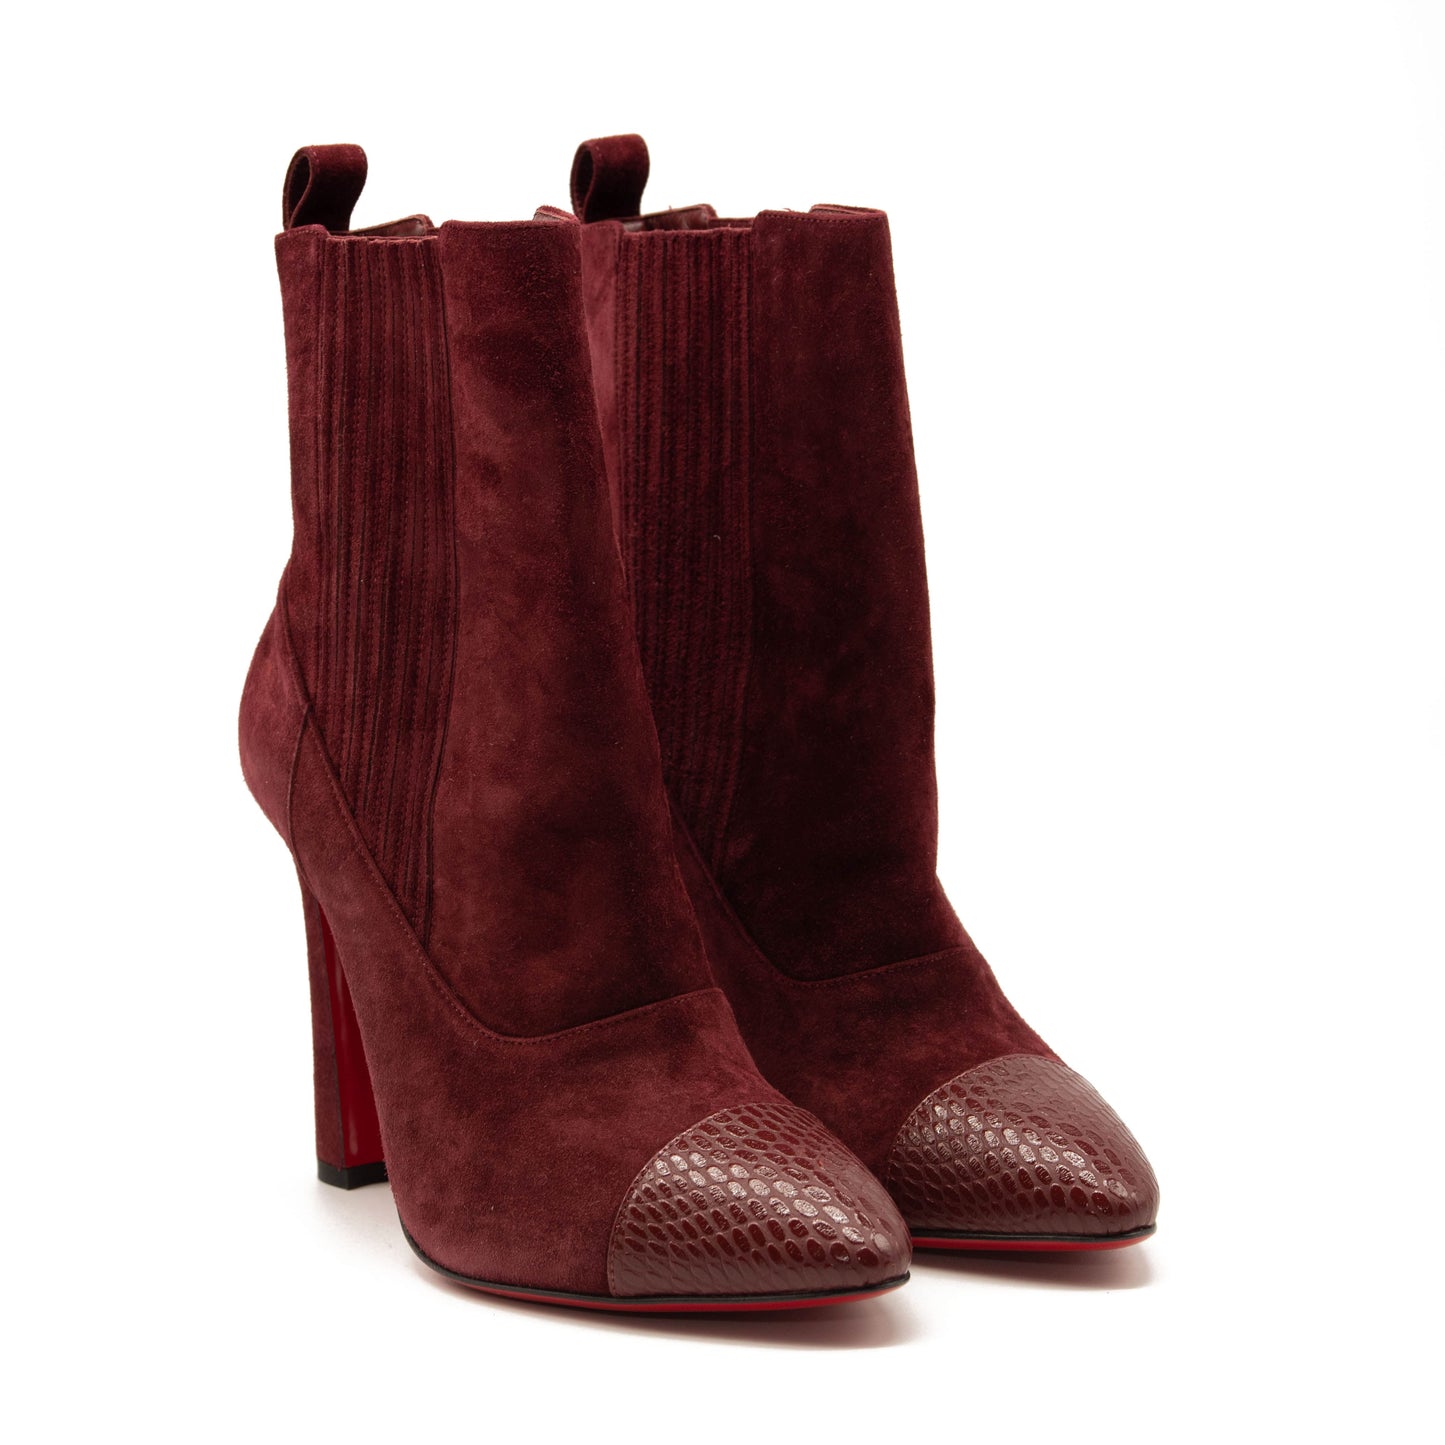 NEW Christian Louboutin Me In The 90s Maroon Suede Snake High Heel Ankle Booties 37.5